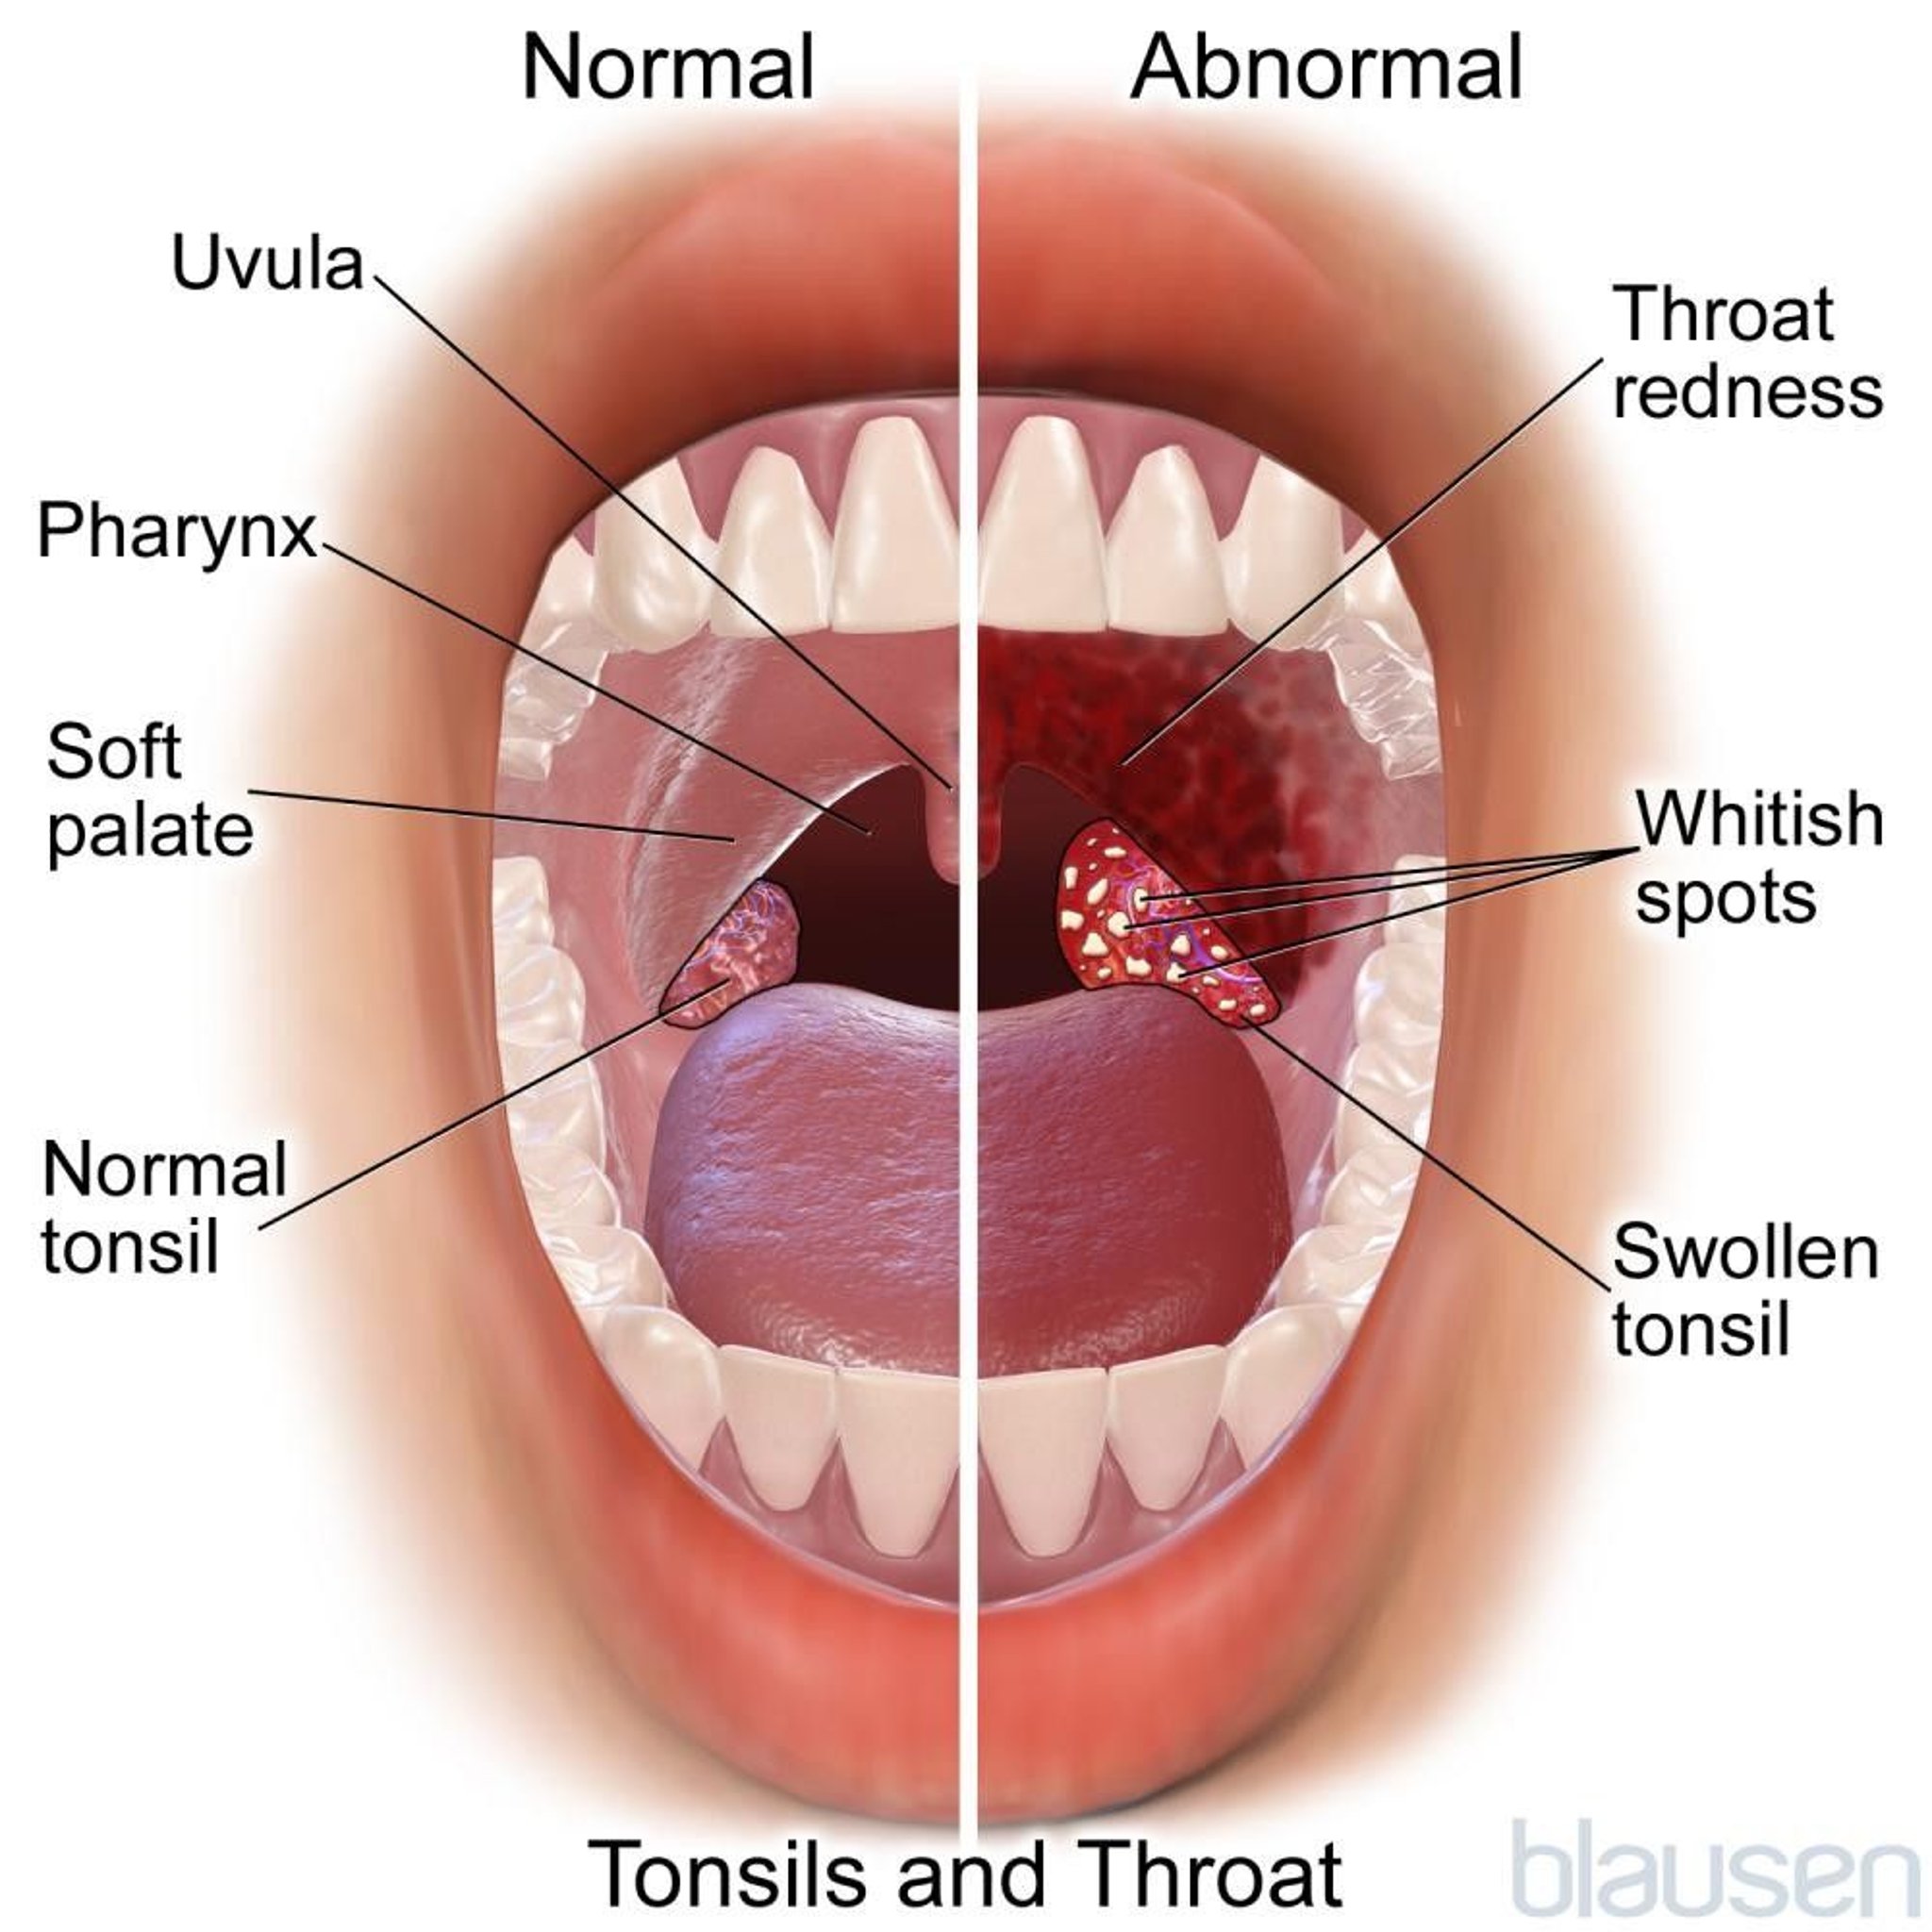 Normal and Abnormal Tonsils and Throat